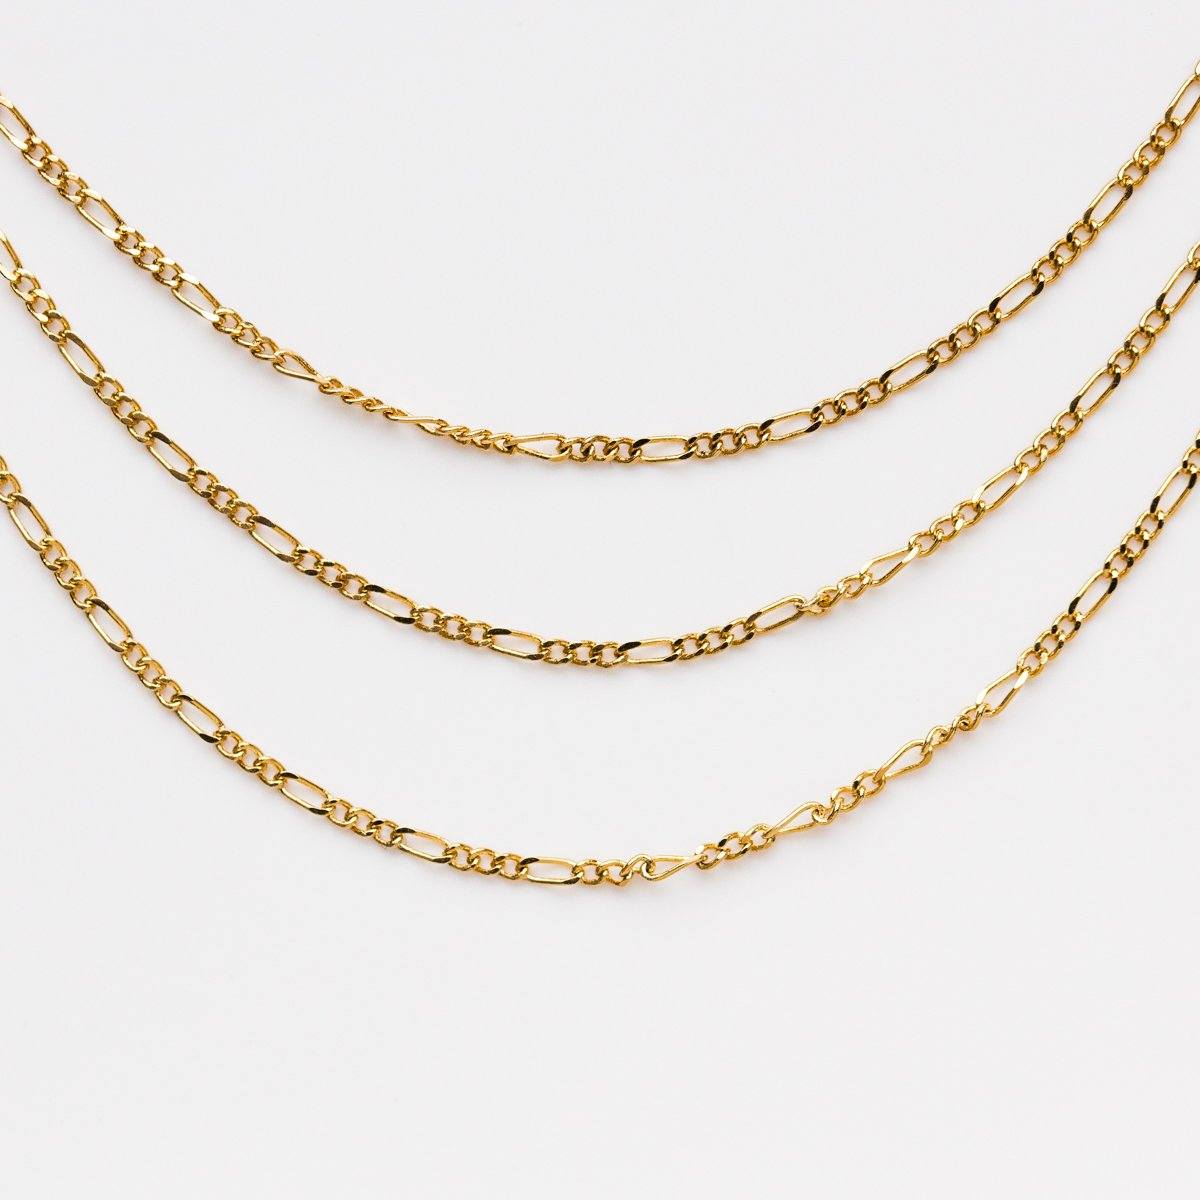 Figaro Chain in Gold - necklaces - Lover's Tempo local eclectic